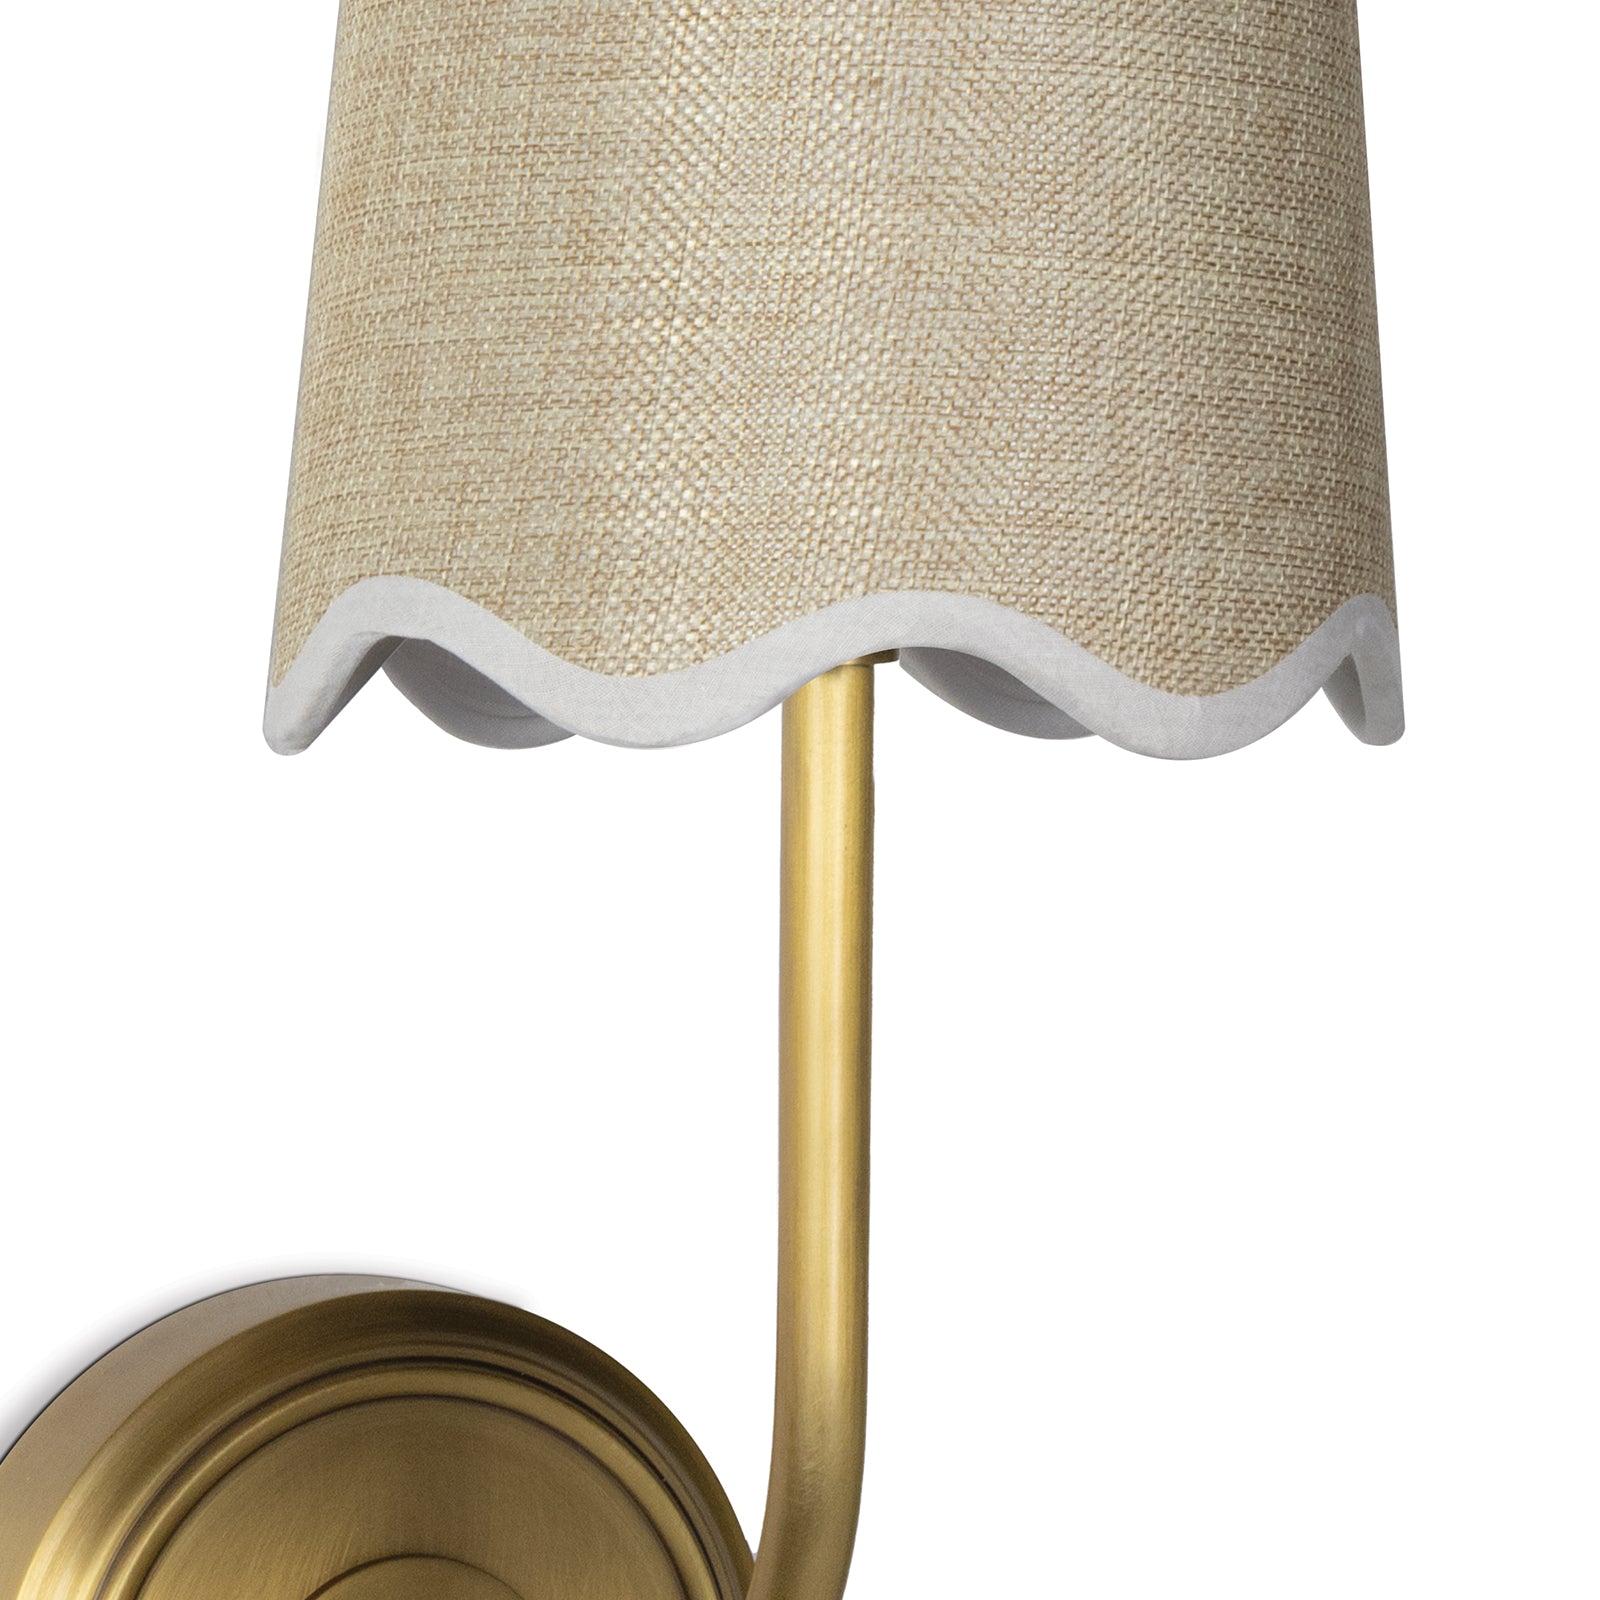 Ariel Sconce in Natural Brass by Coastal Living